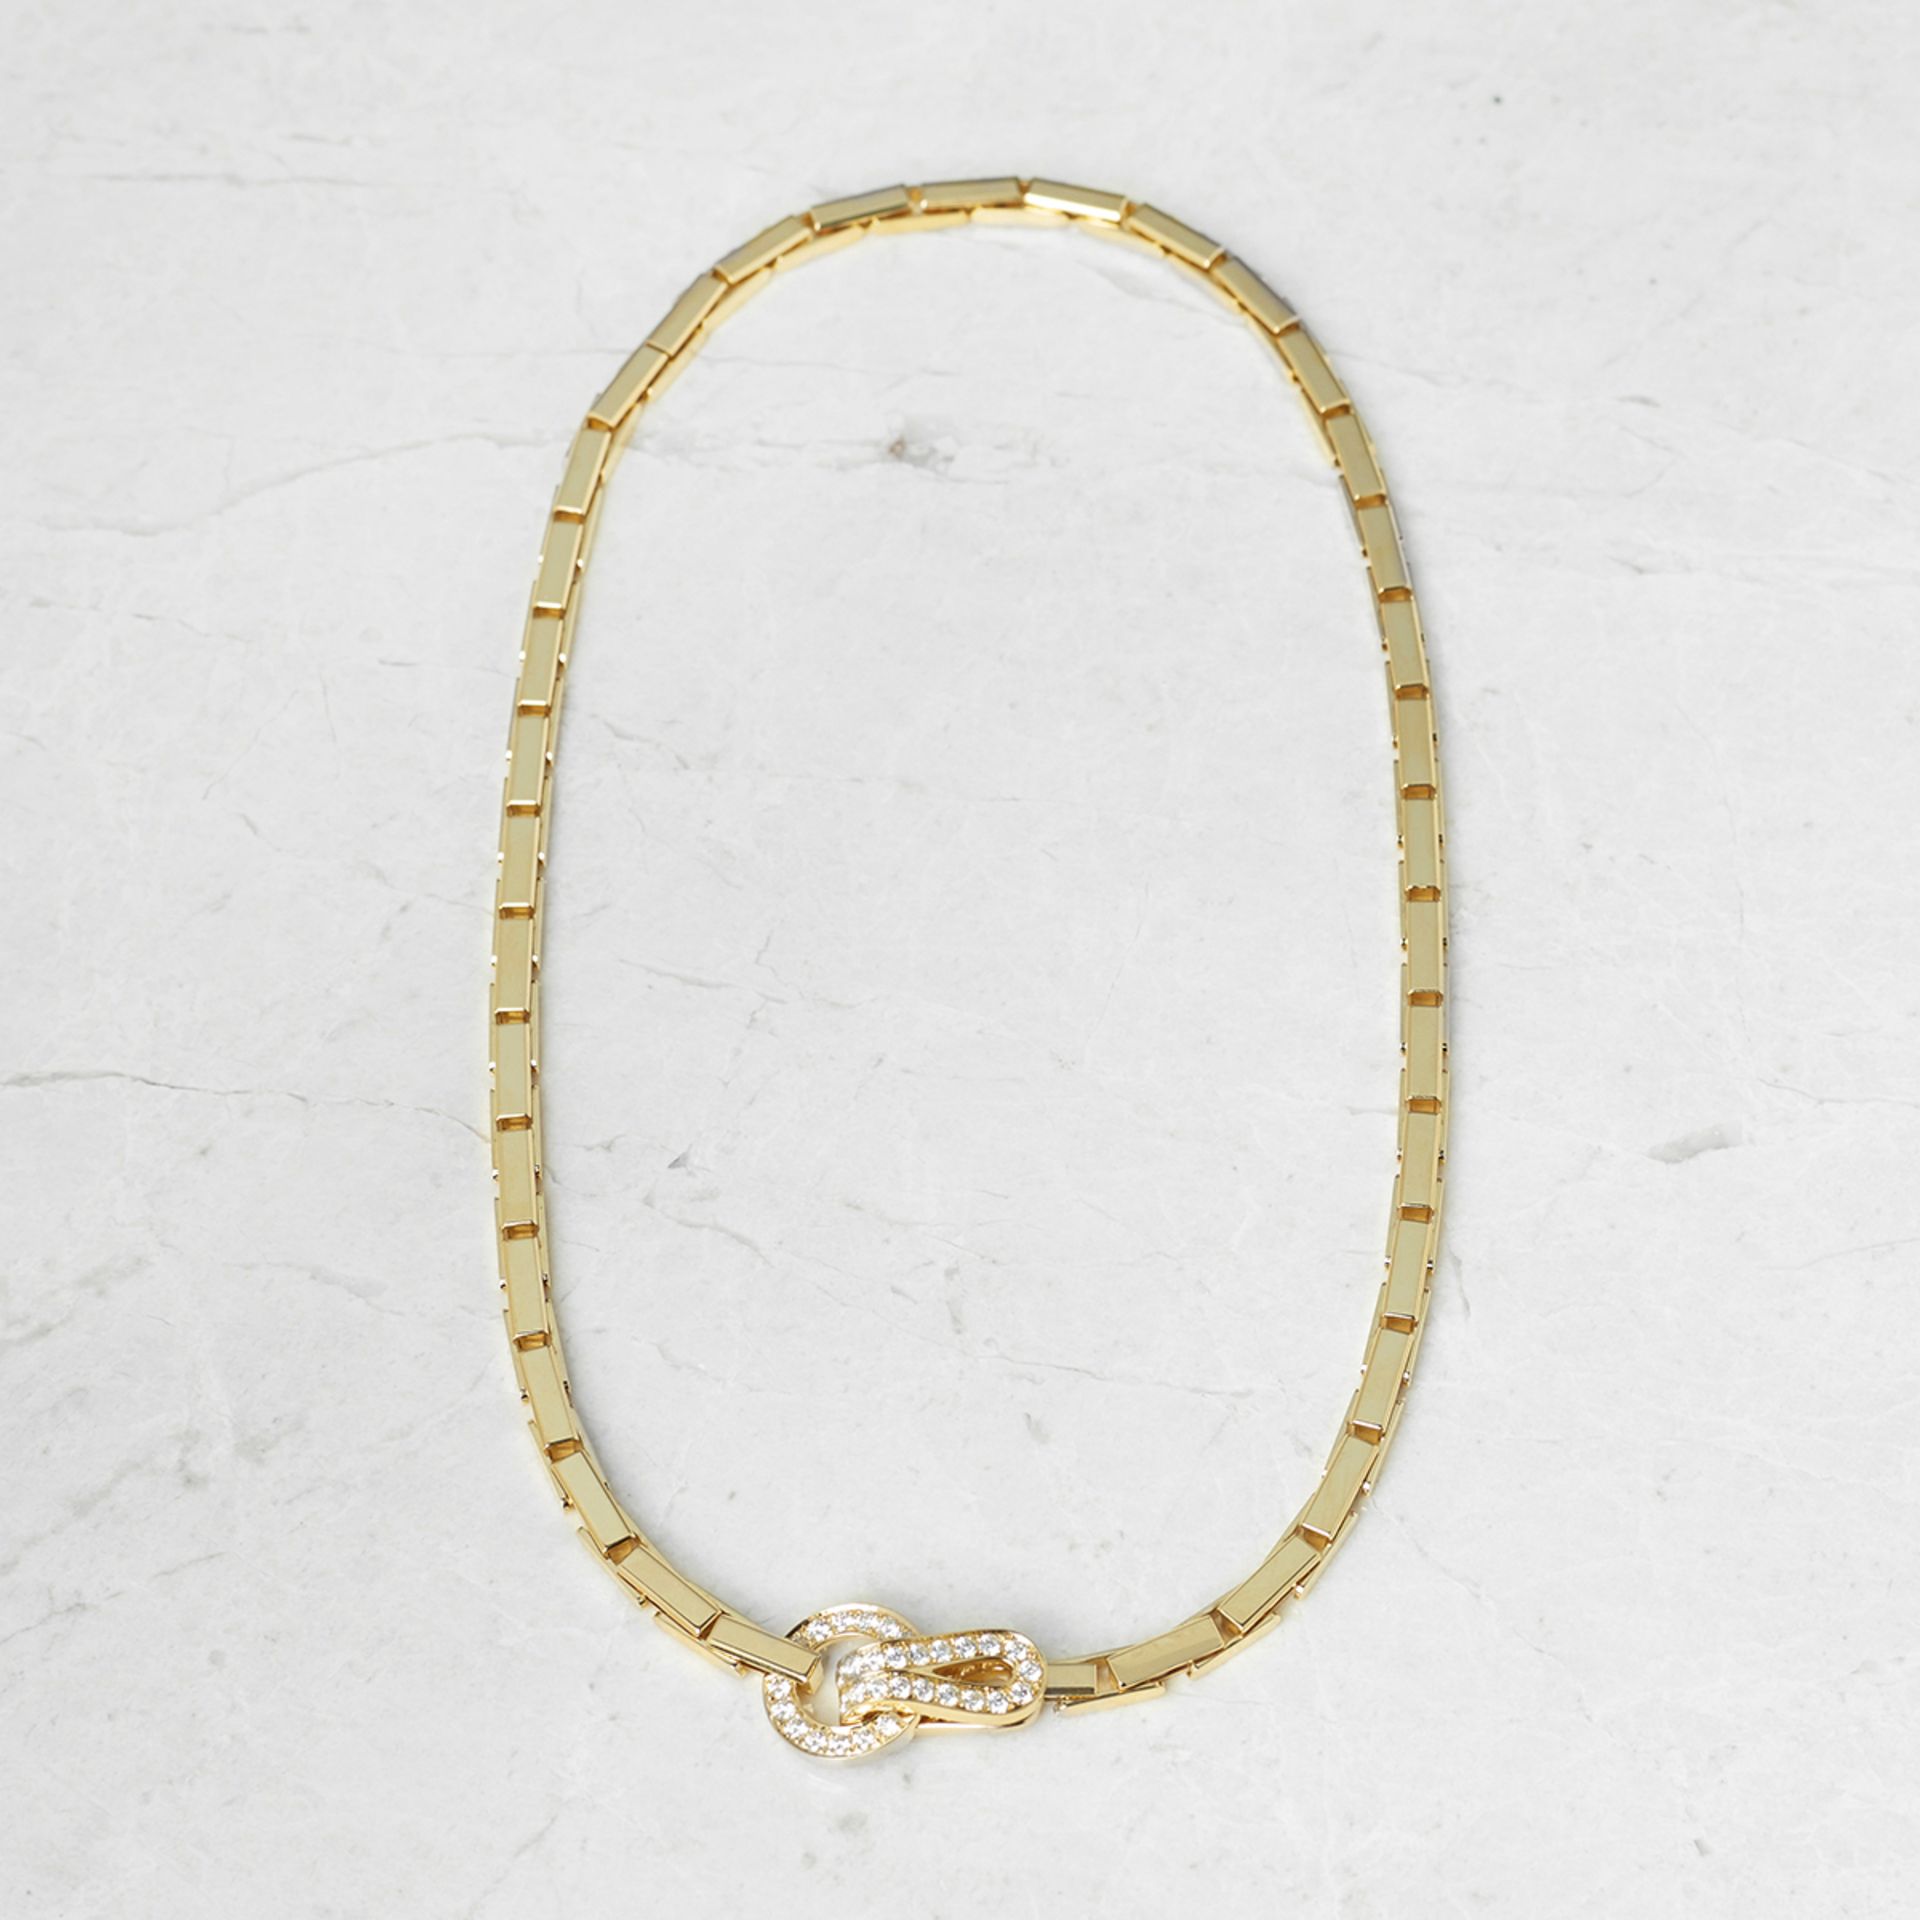 Cartier 18k Yellow Gold Diamond Agrafe Necklace - Image 4 of 5